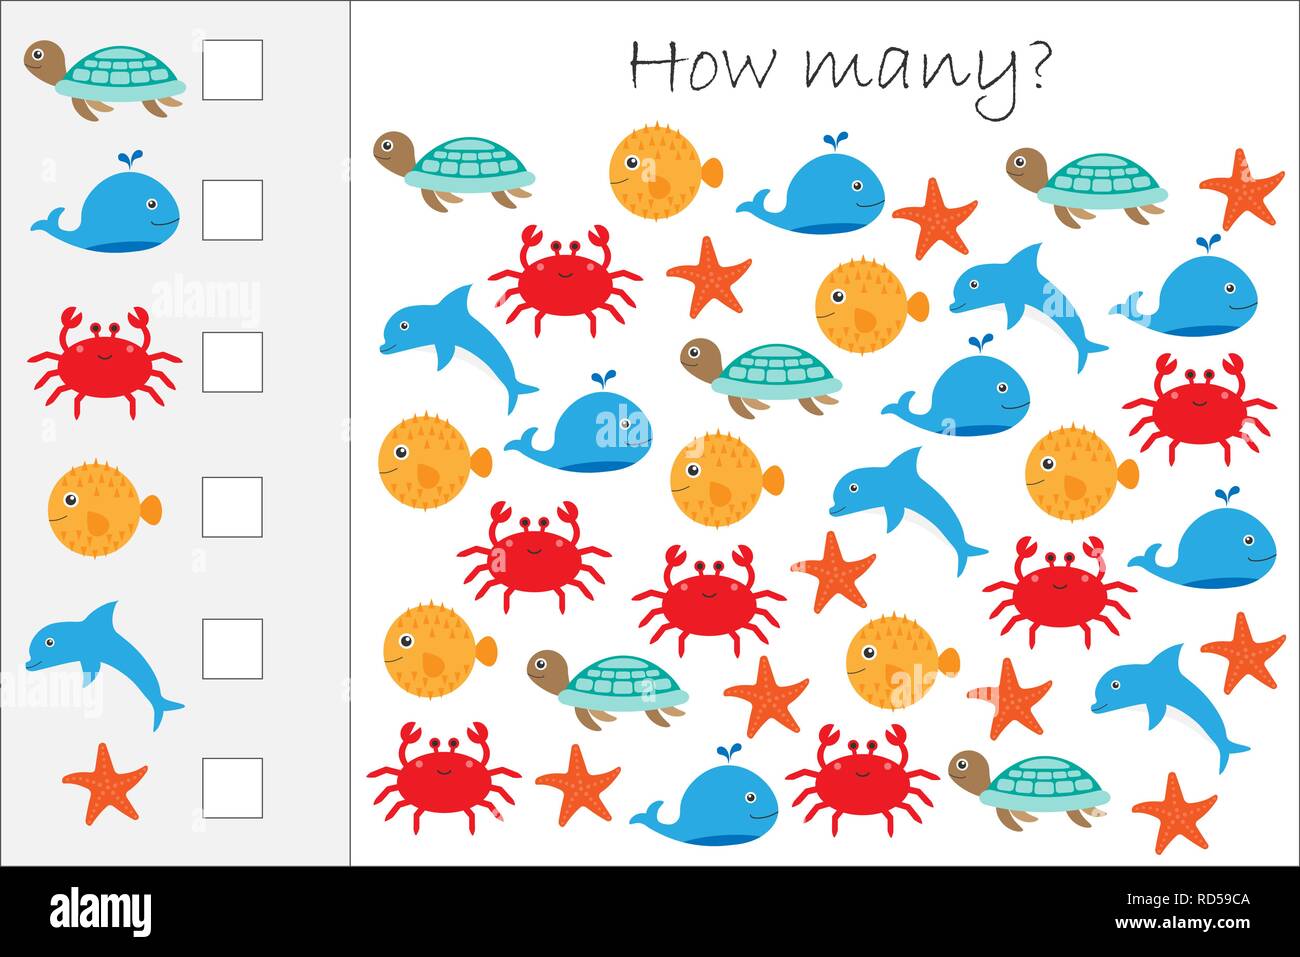 how-many-counting-game-with-ocean-animals-for-kids-educational-maths-task-for-the-development